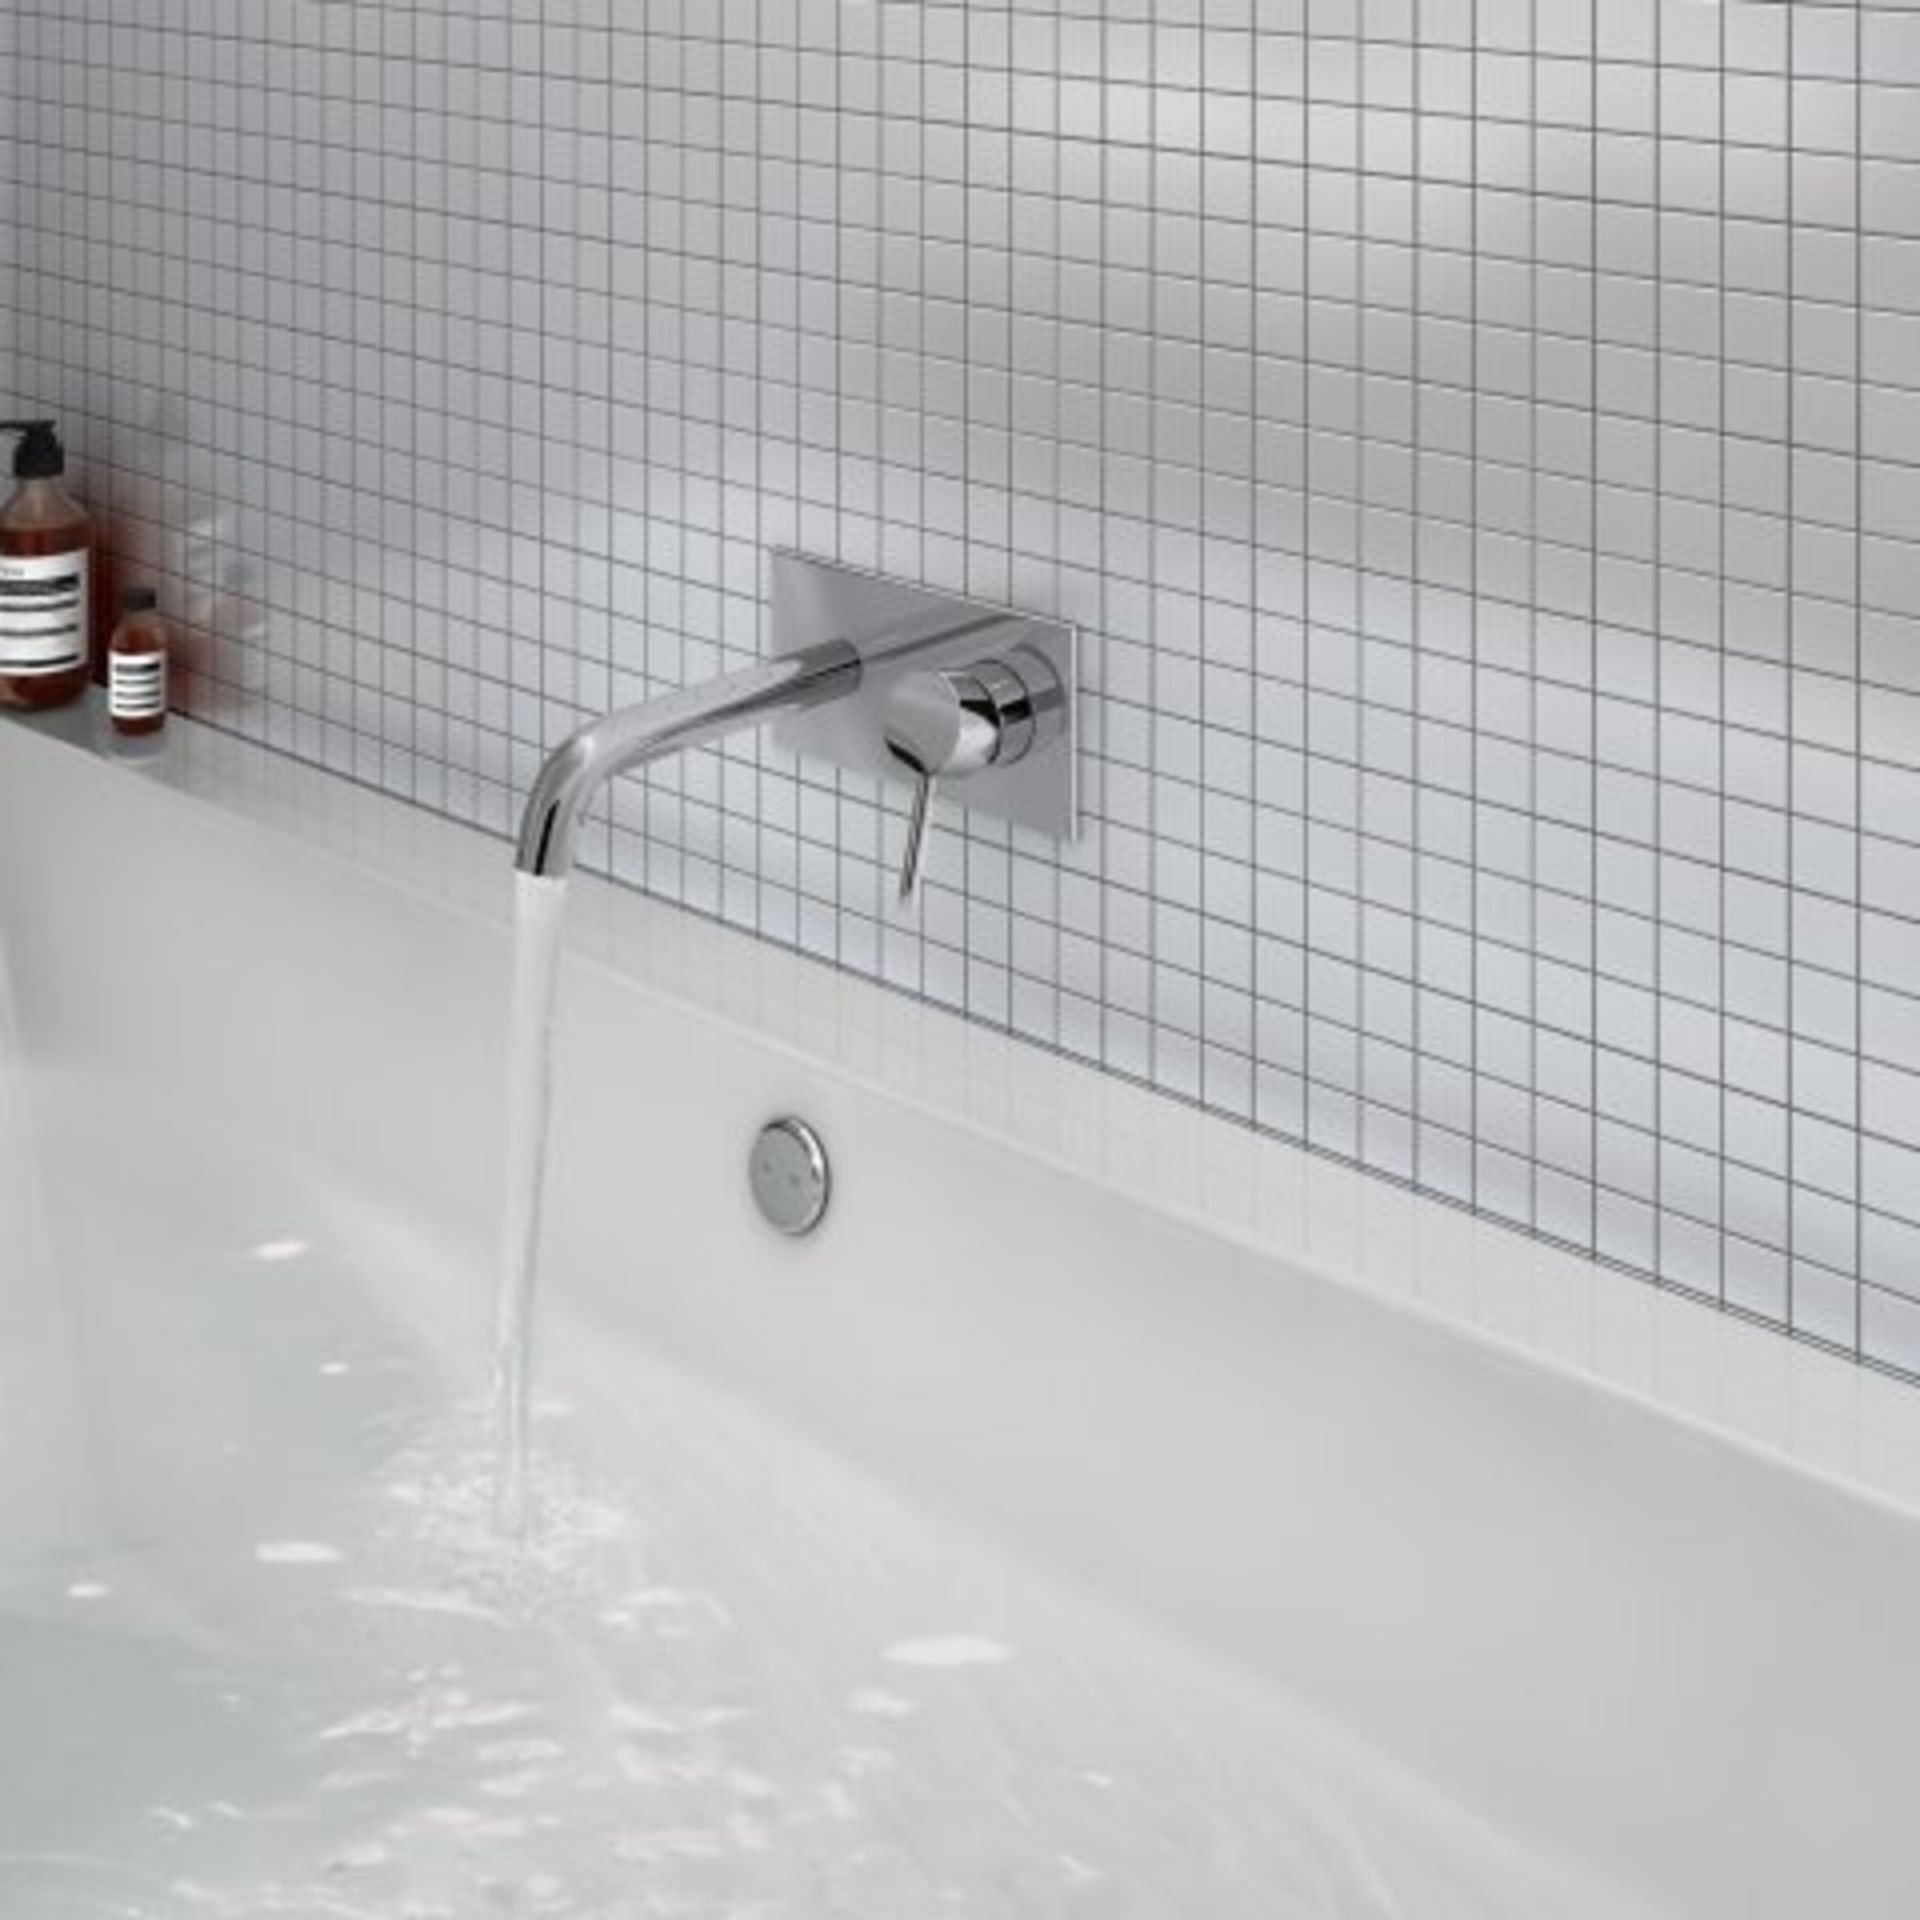 (O176) Gladstone Wall Mounted Bath Mixer Our Gladstone Range of taps are thoughtfully designed to - Image 2 of 4